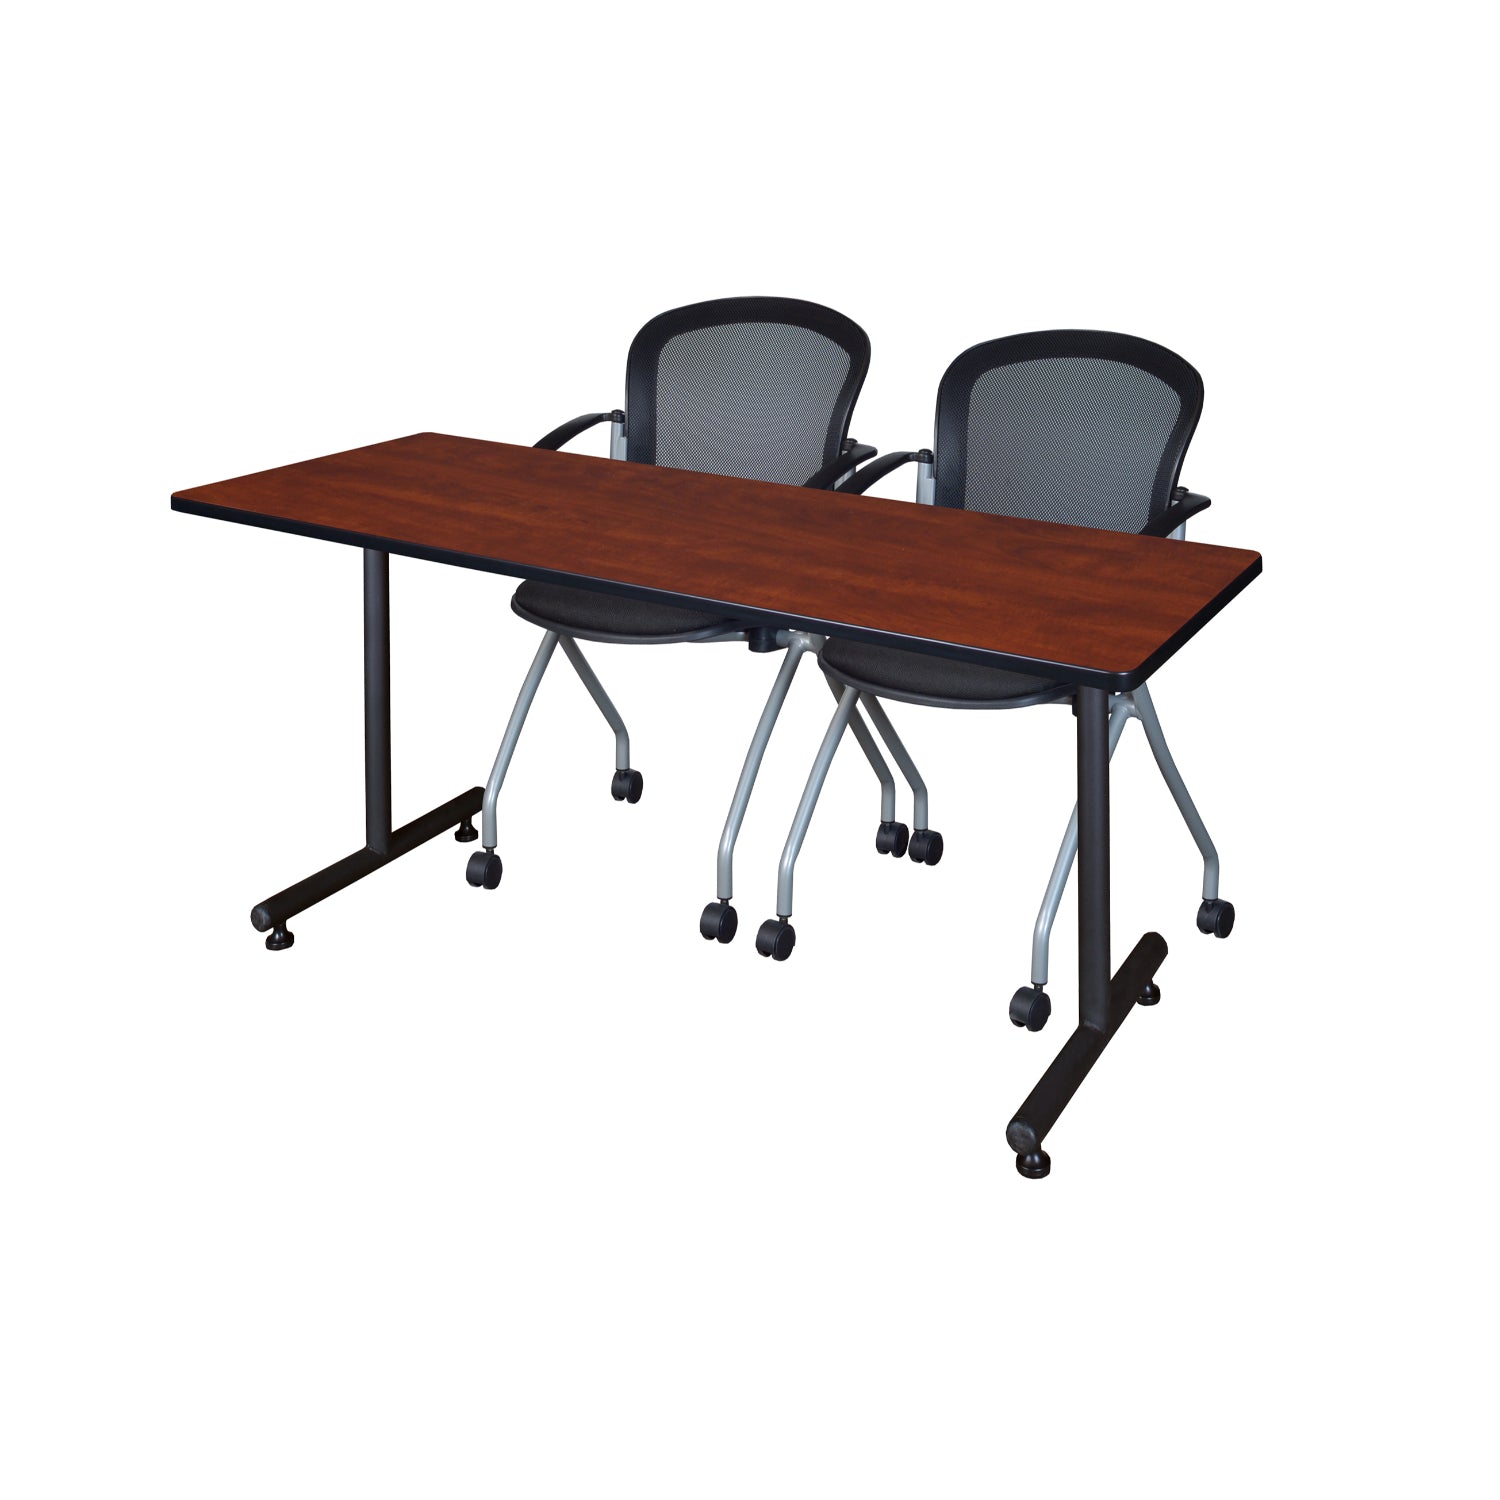 Kobe Training Table and Chair Package, Kobe 60" x 30" T-Base Training/Seminar Table with 2 Cadence Nesting Chairs